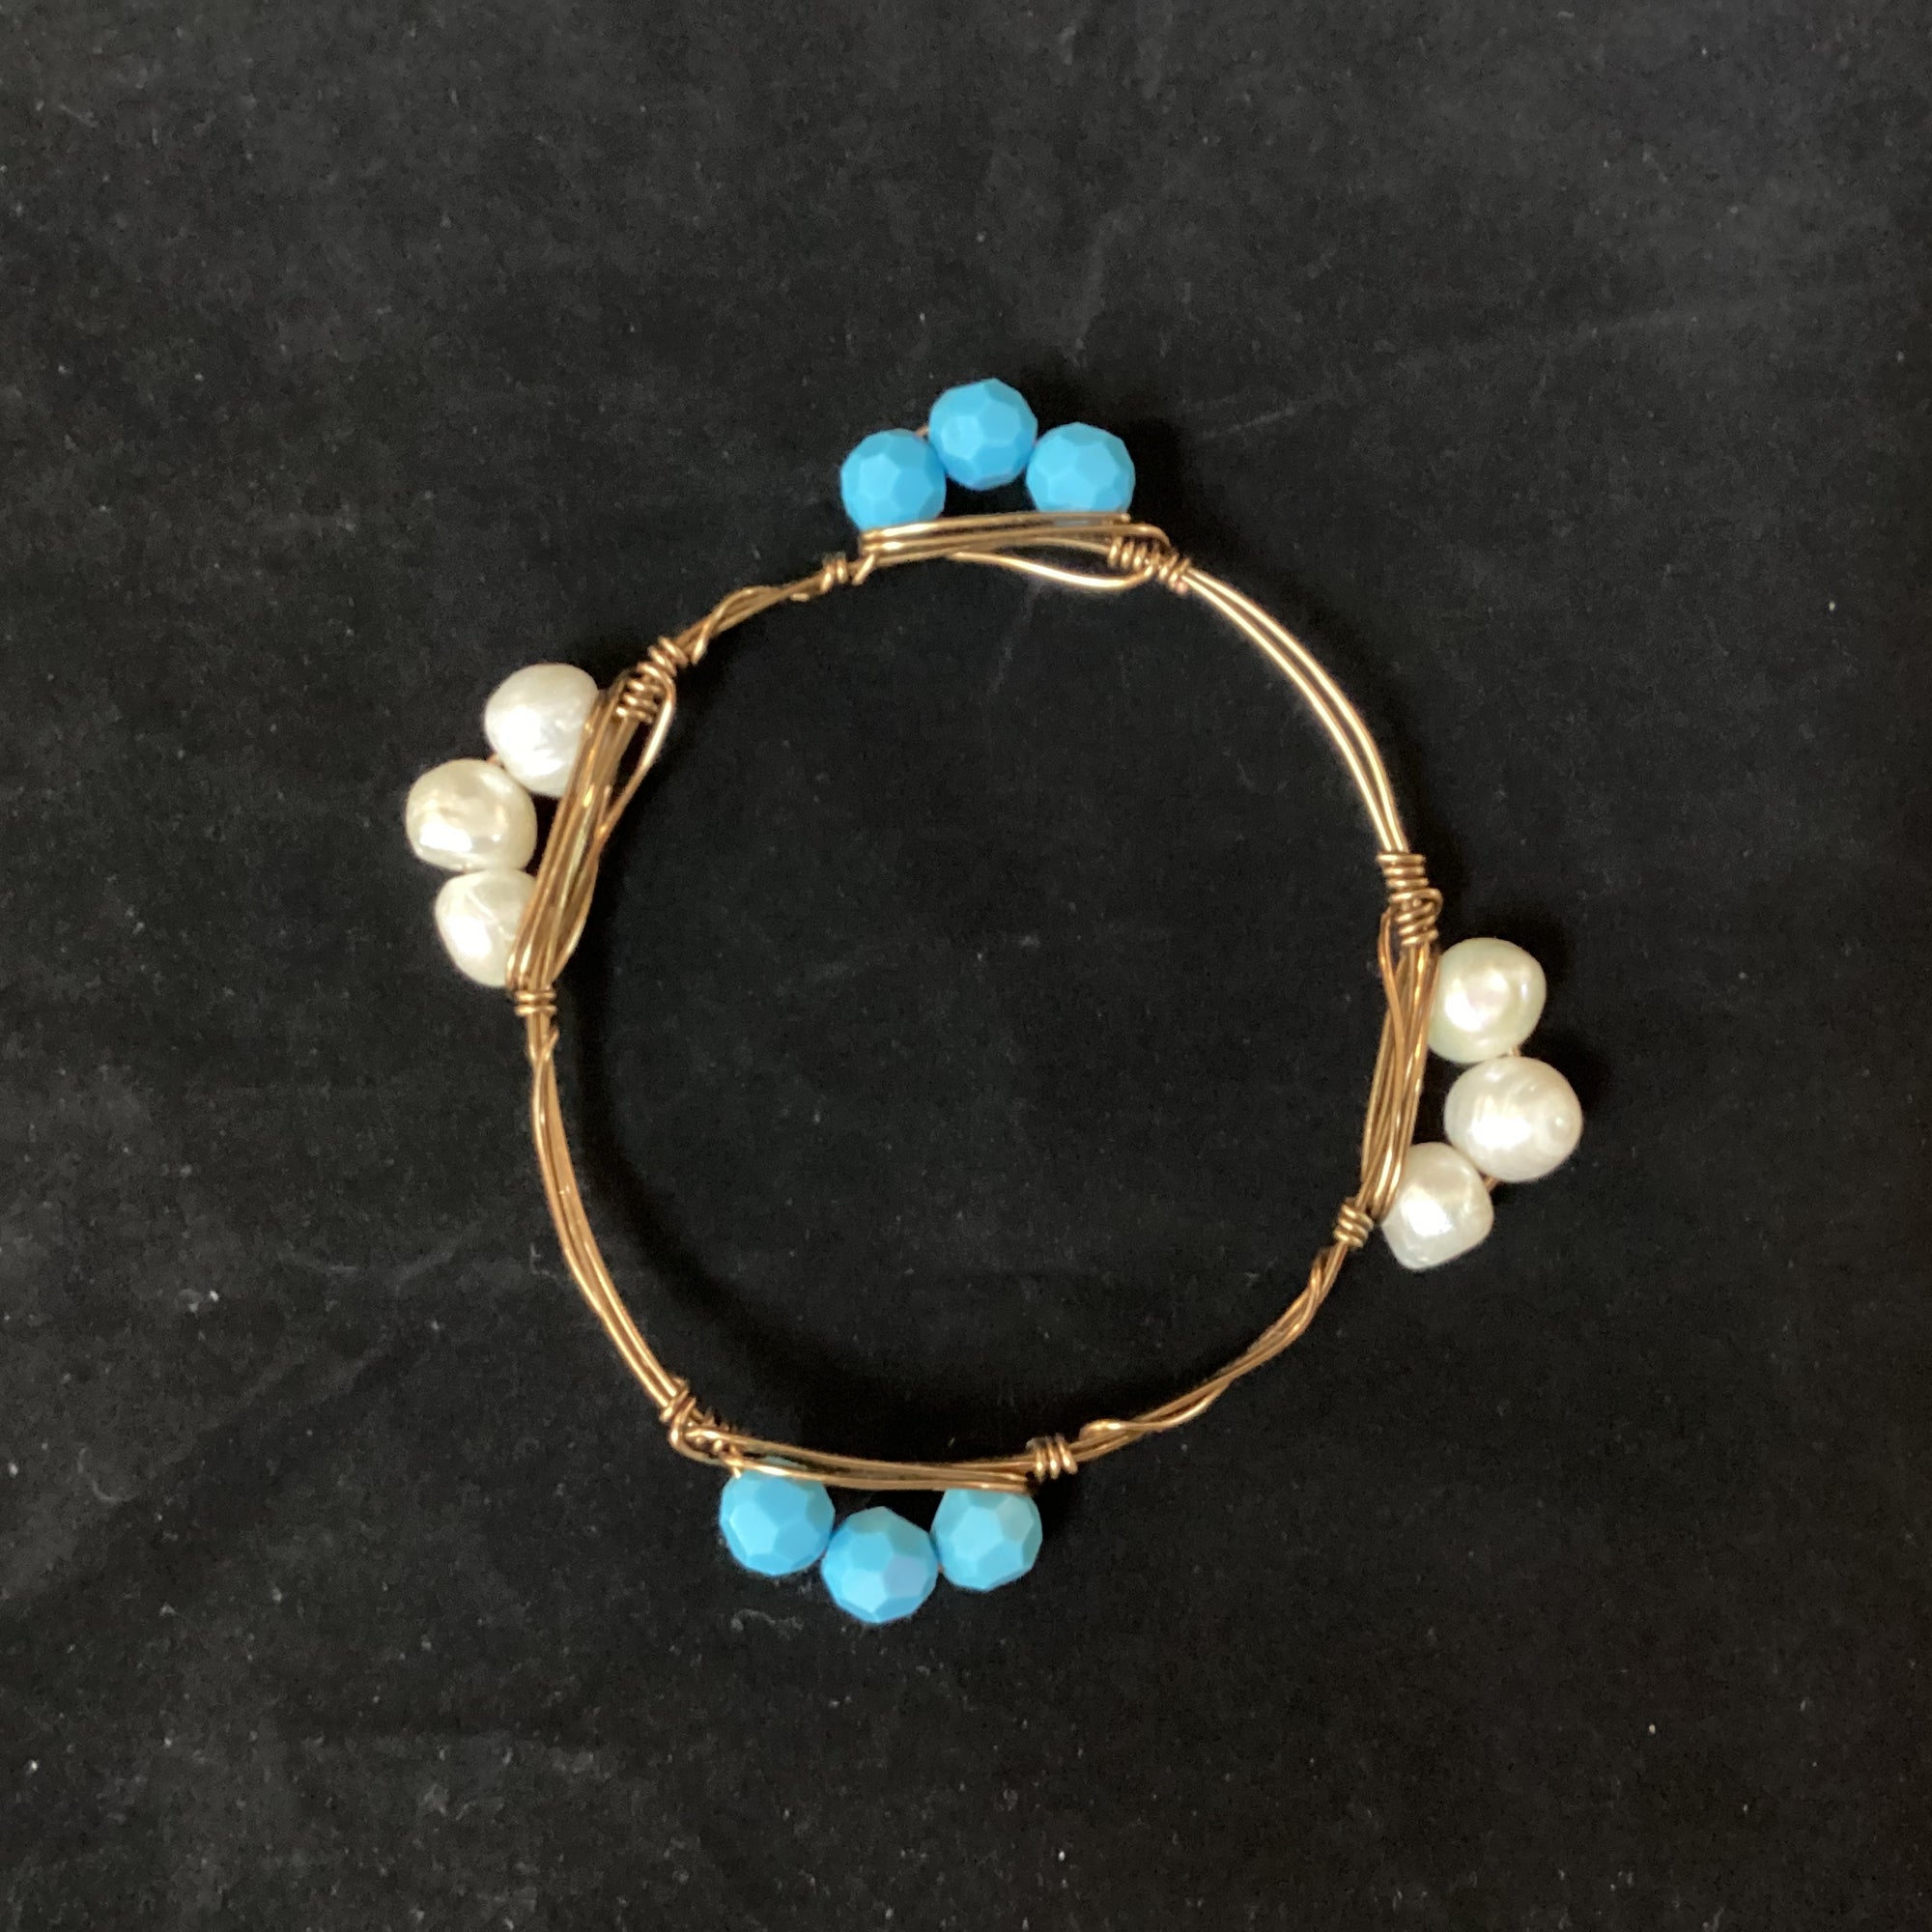 Bracelet with blue and white beads